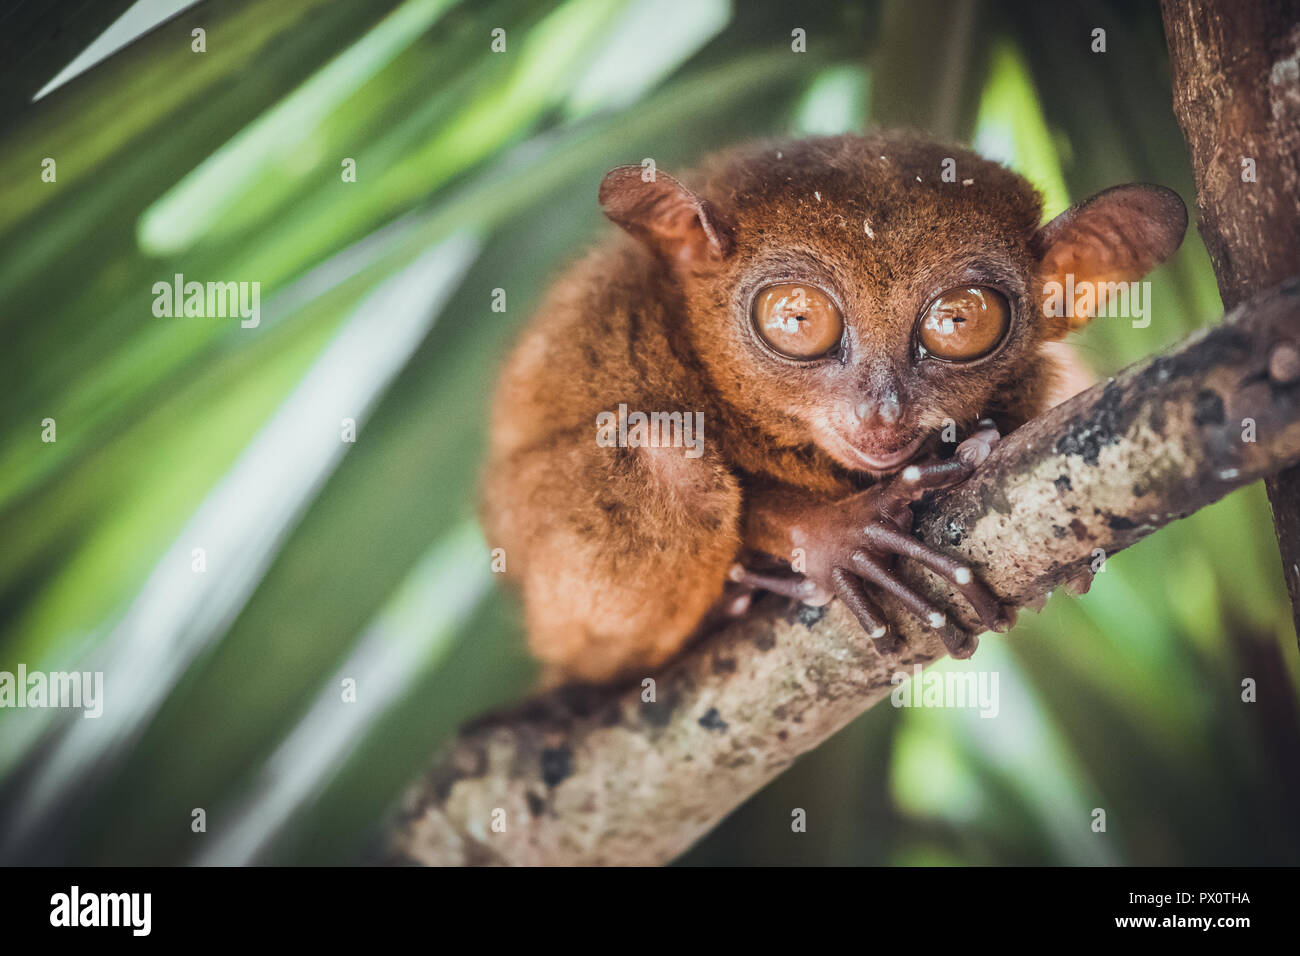 Endangered Tarsier in Bohol Tarsier sanctuary, Cebu, Philippines. Cute  Tarsius monkey with big eyes sitting on a branch with green leaves. The  smallest primate Carlito syrichta in nature Stock Photo - Alamy